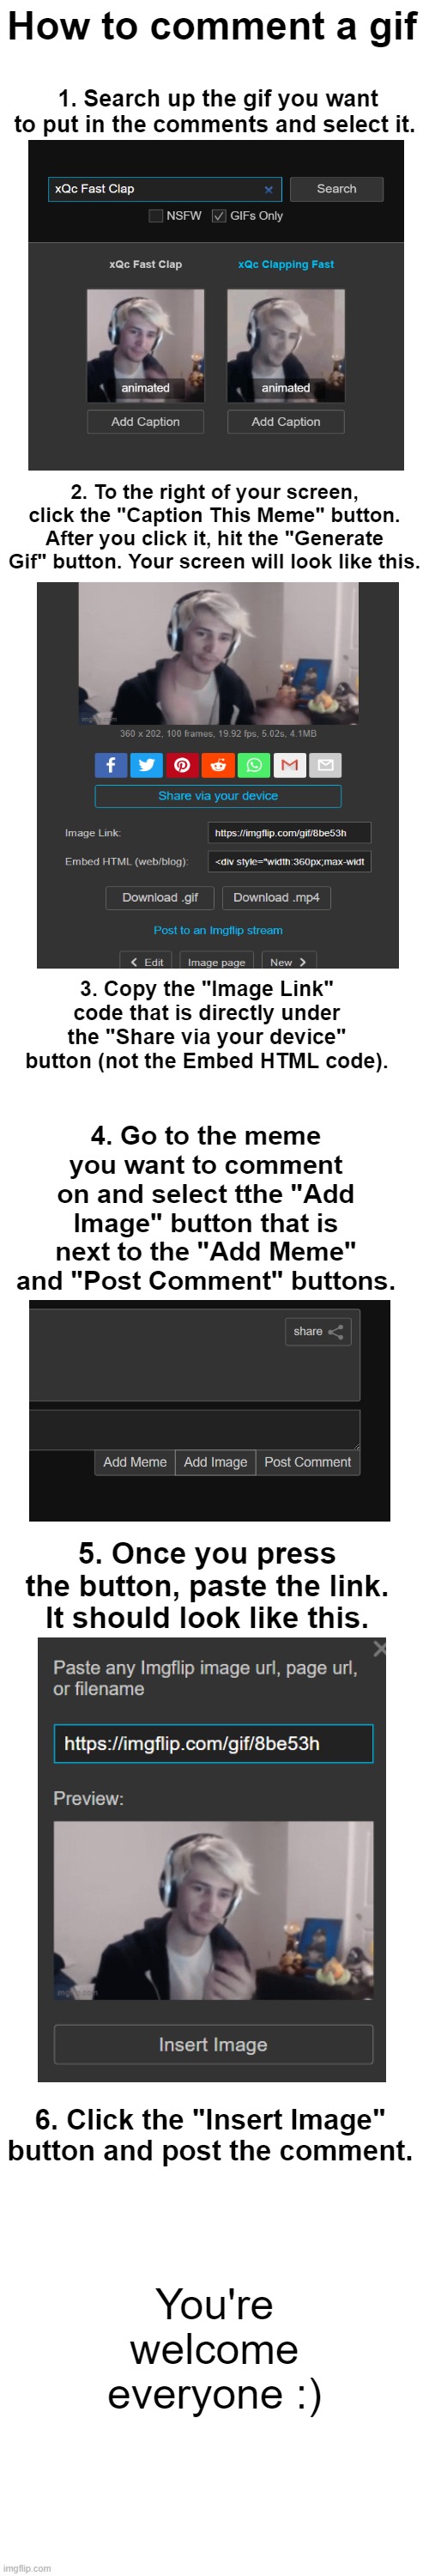 For all the new users of ImgFlip, or just as a reminder for everyone. | How to comment a gif; 1. Search up the gif you want to put in the comments and select it. 2. To the right of your screen, click the "Caption This Meme" button. After you click it, hit the "Generate Gif" button. Your screen will look like this. 3. Copy the "Image Link" code that is directly under the "Share via your device" button (not the Embed HTML code). 4. Go to the meme you want to comment on and select tthe "Add Image" button that is next to the "Add Meme" and "Post Comment" buttons. 5. Once you press the button, paste the link. It should look like this. 6. Click the "Insert Image" button and post the comment. You're welcome everyone :) | image tagged in how to,tips,tricks,reminder | made w/ Imgflip meme maker